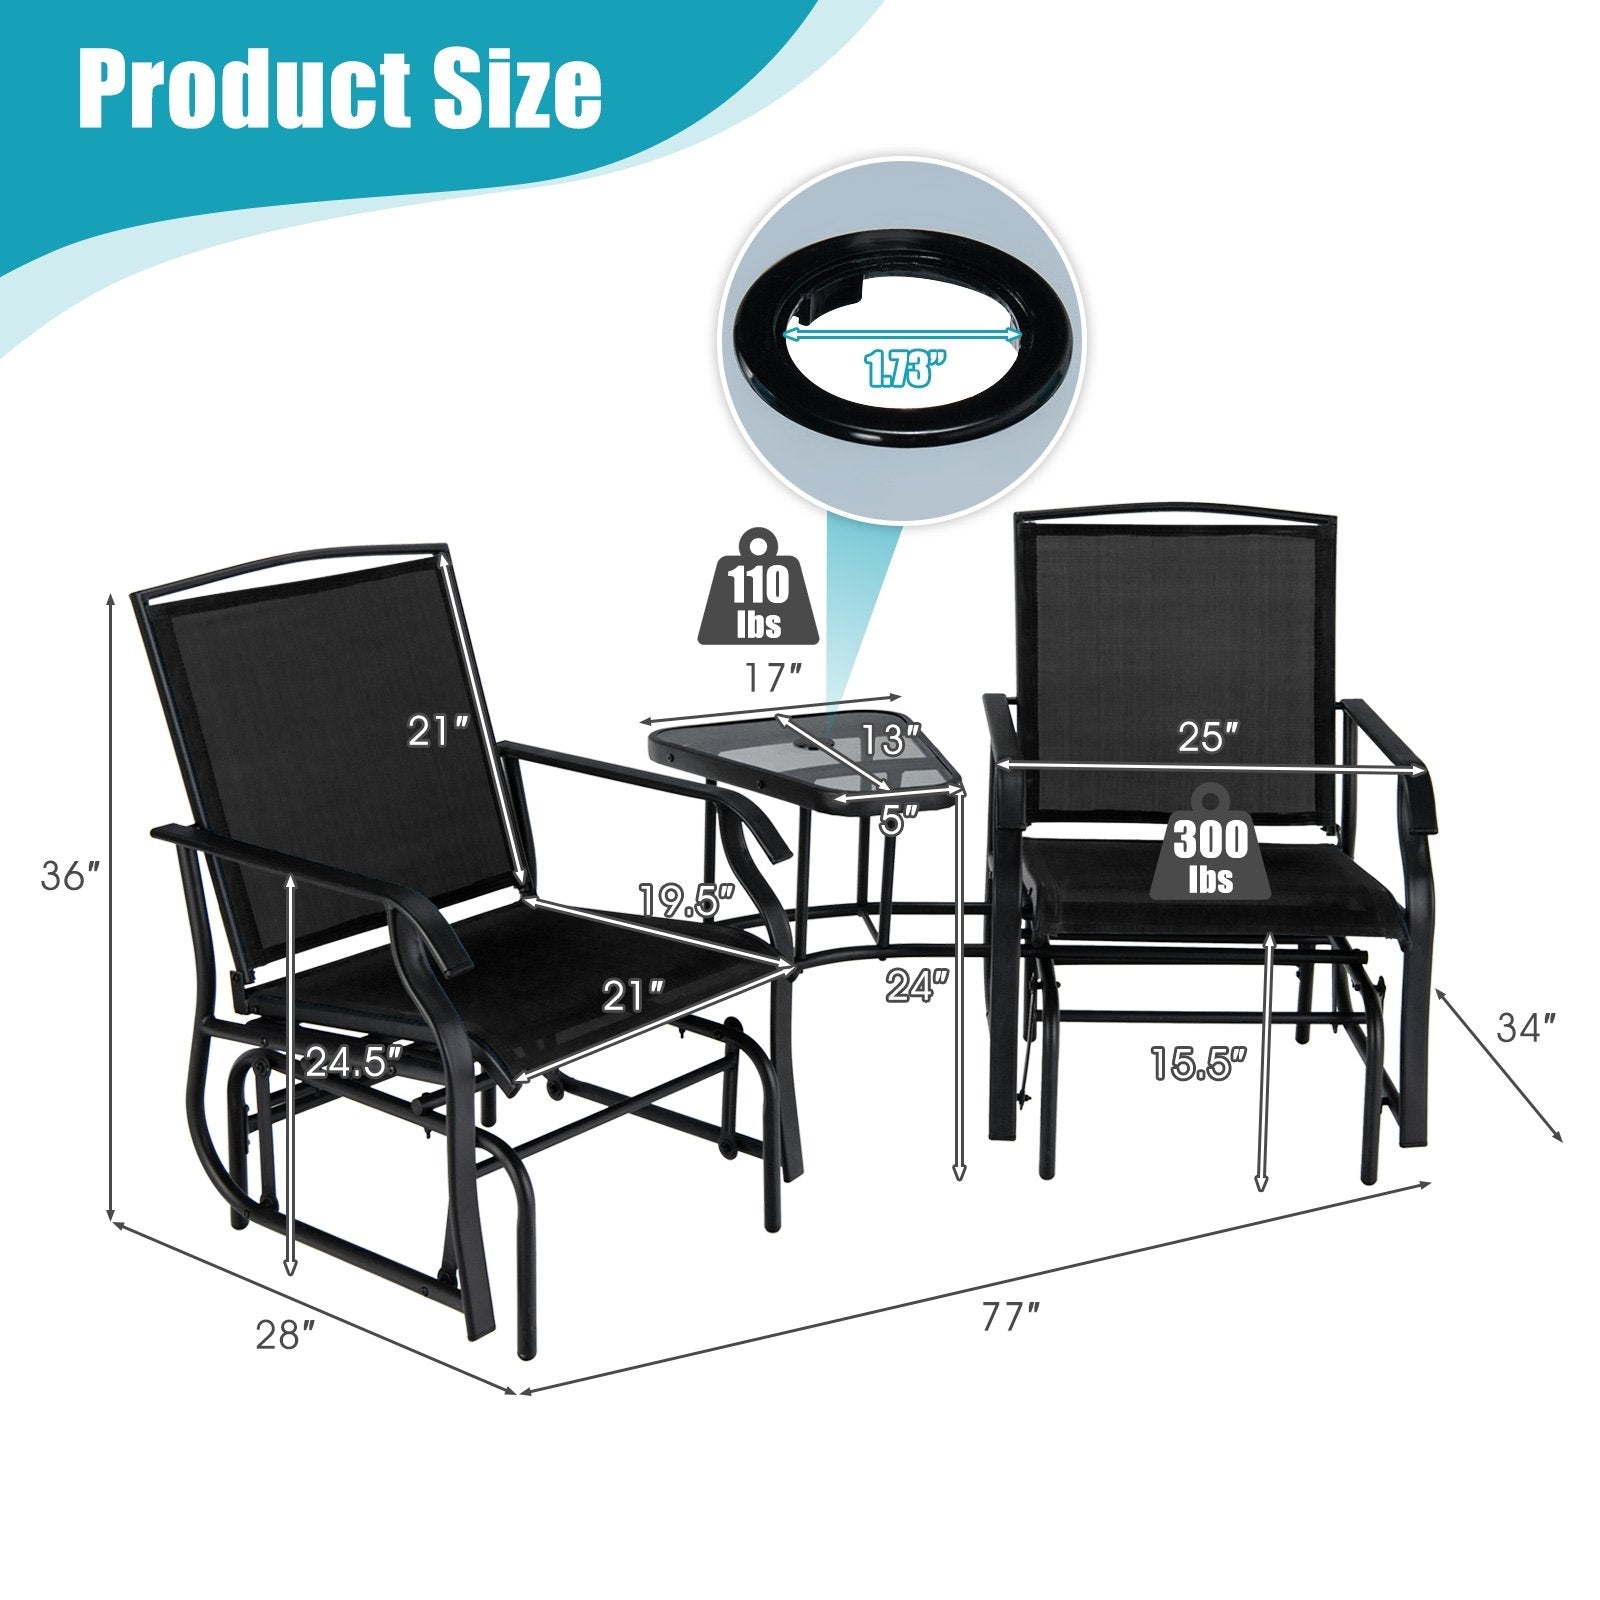 Double Swing Glider Rocker Chair set with Glass Table, Black - Gallery Canada